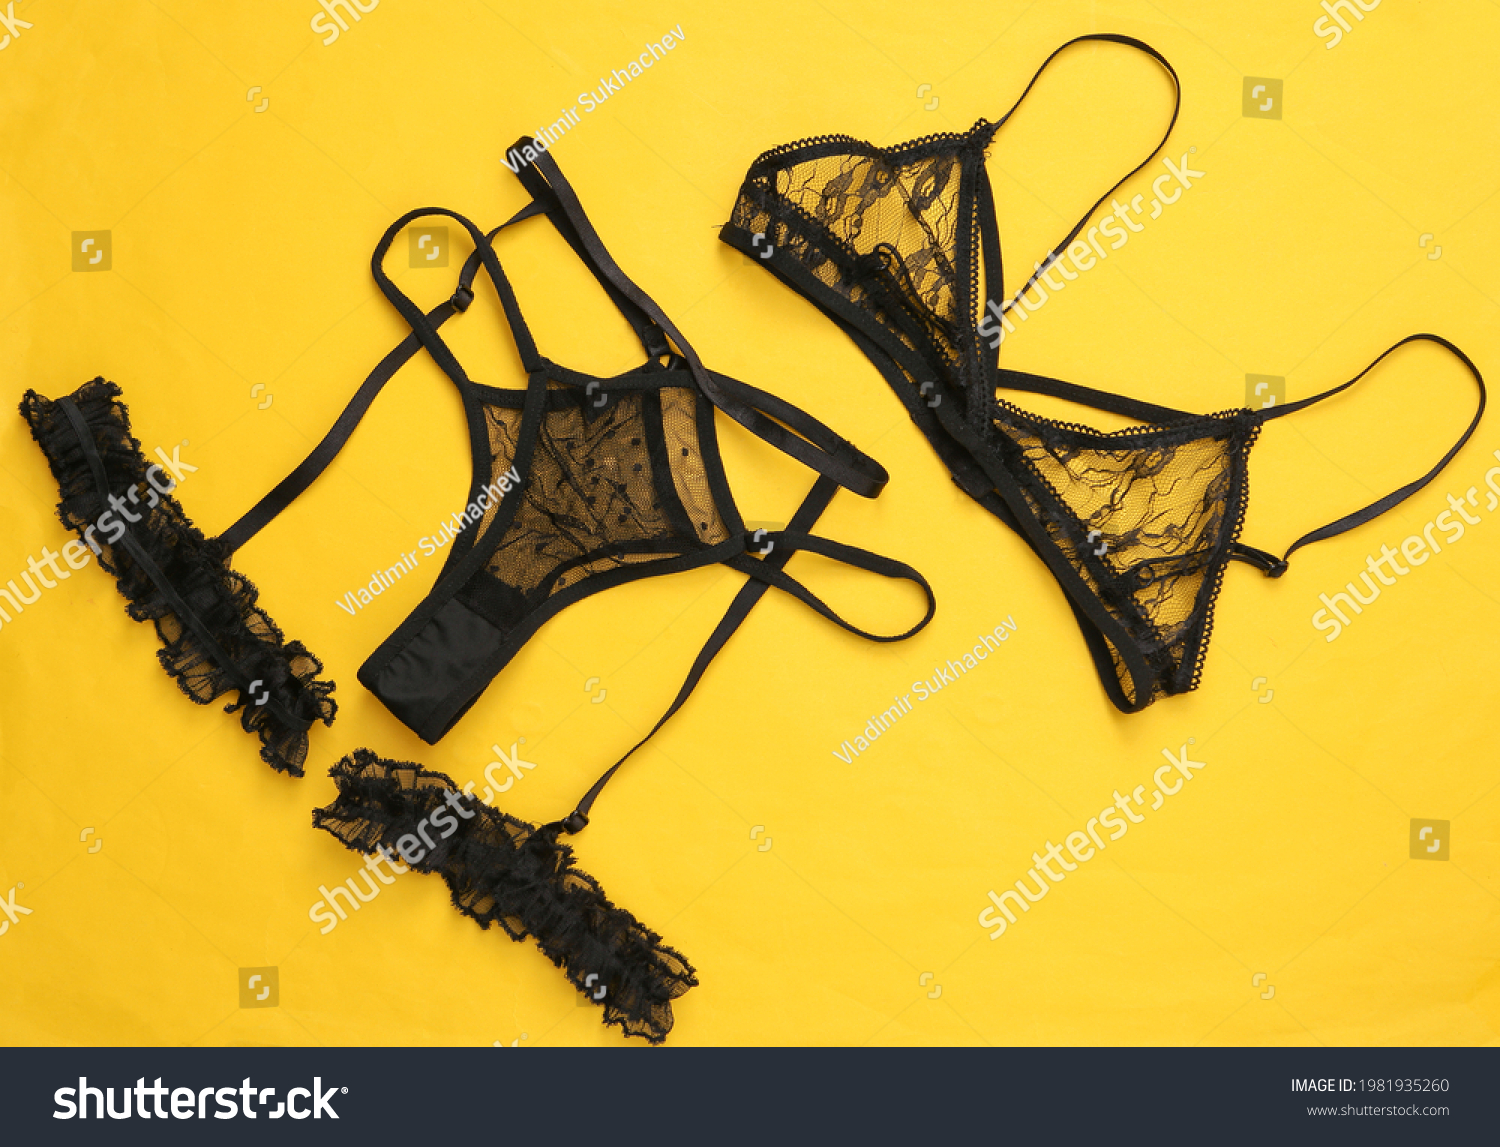 Bra And Panty Pictures